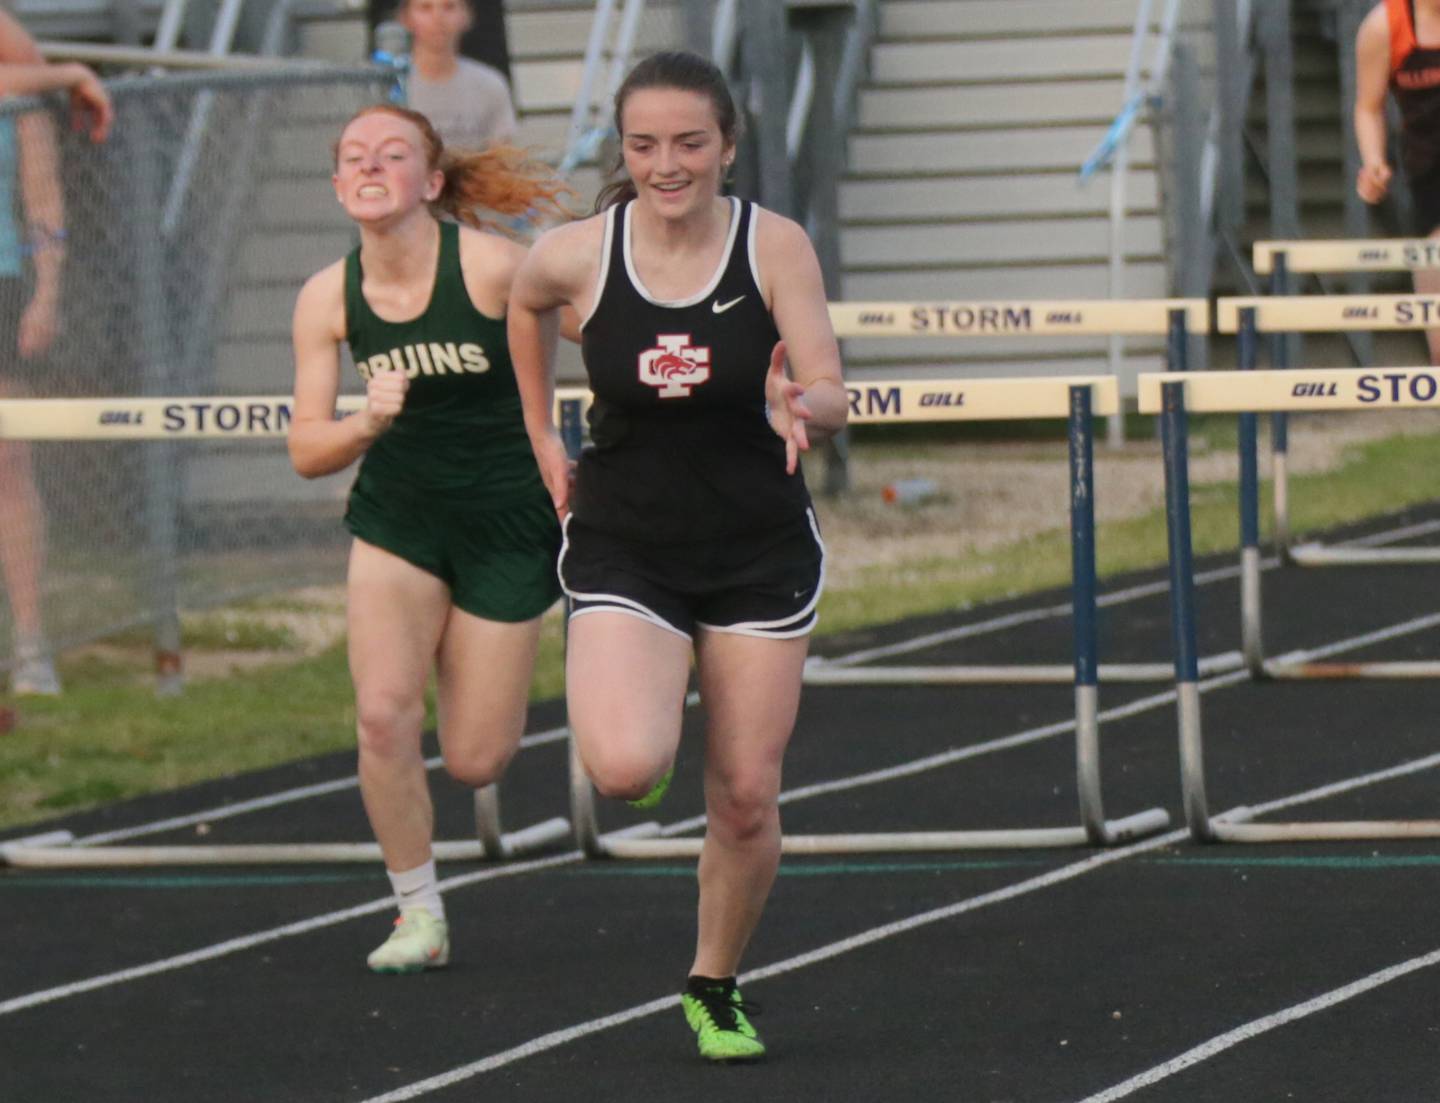 Indian Creek's Kaitlyn Frazier sprints past St. Bede's Macy Zeglis to take second place in the 100-meter hurdles Wednesday, May 11, 2022, at Bureau Valley High School in Manlius.